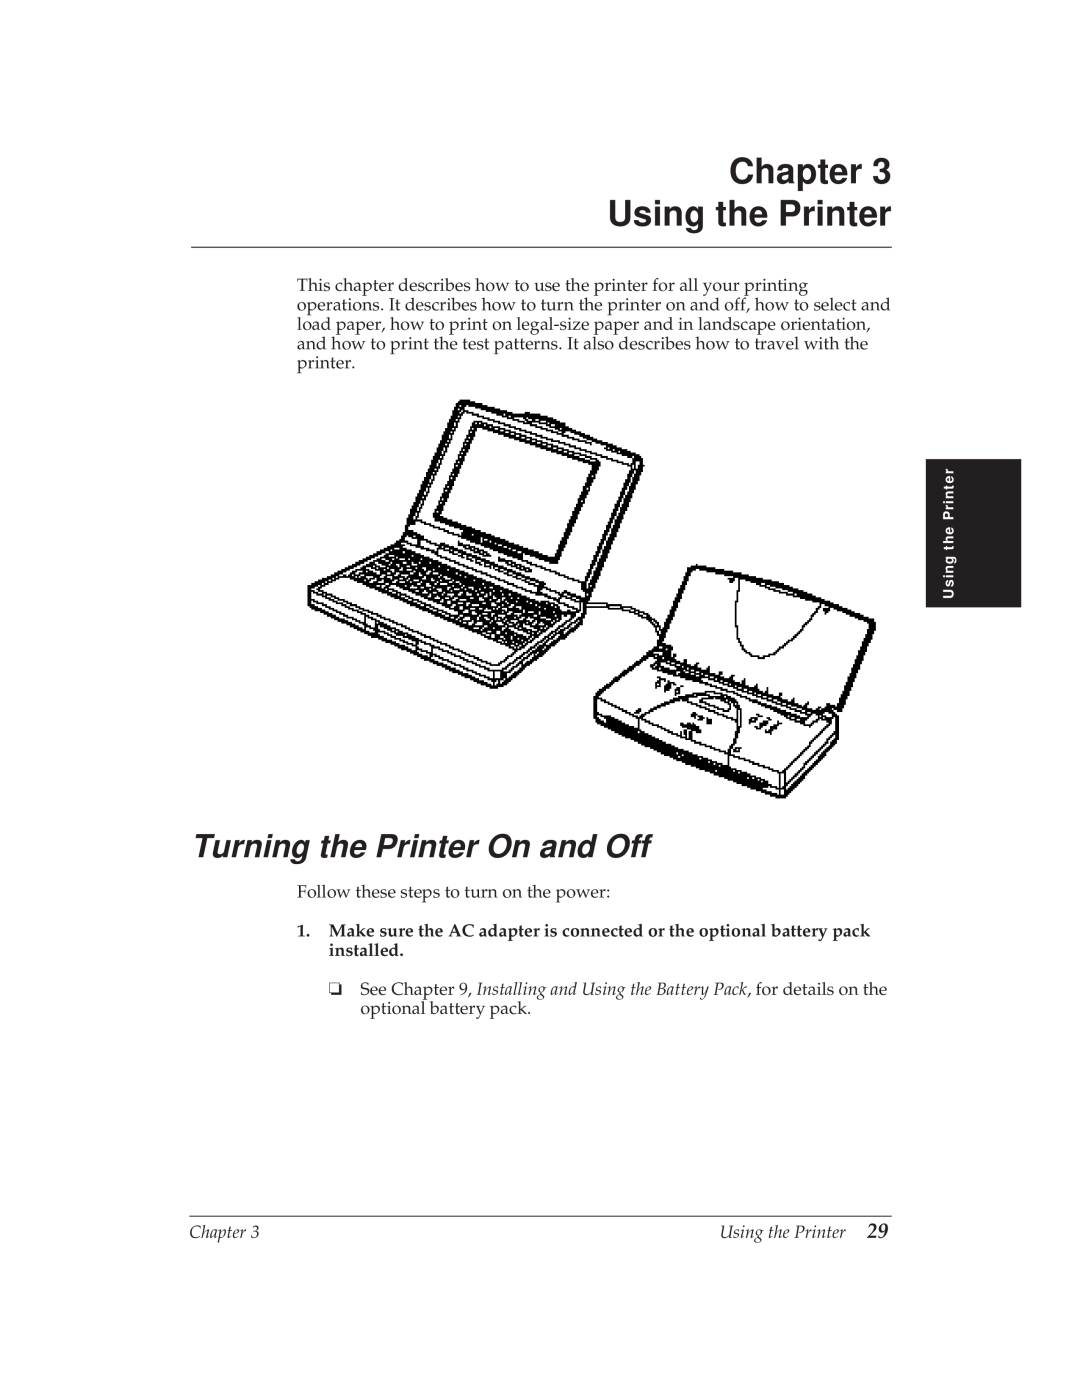 Canon BJ-30 manual Chapter Using the Printer, Turning the Printer On and Off 